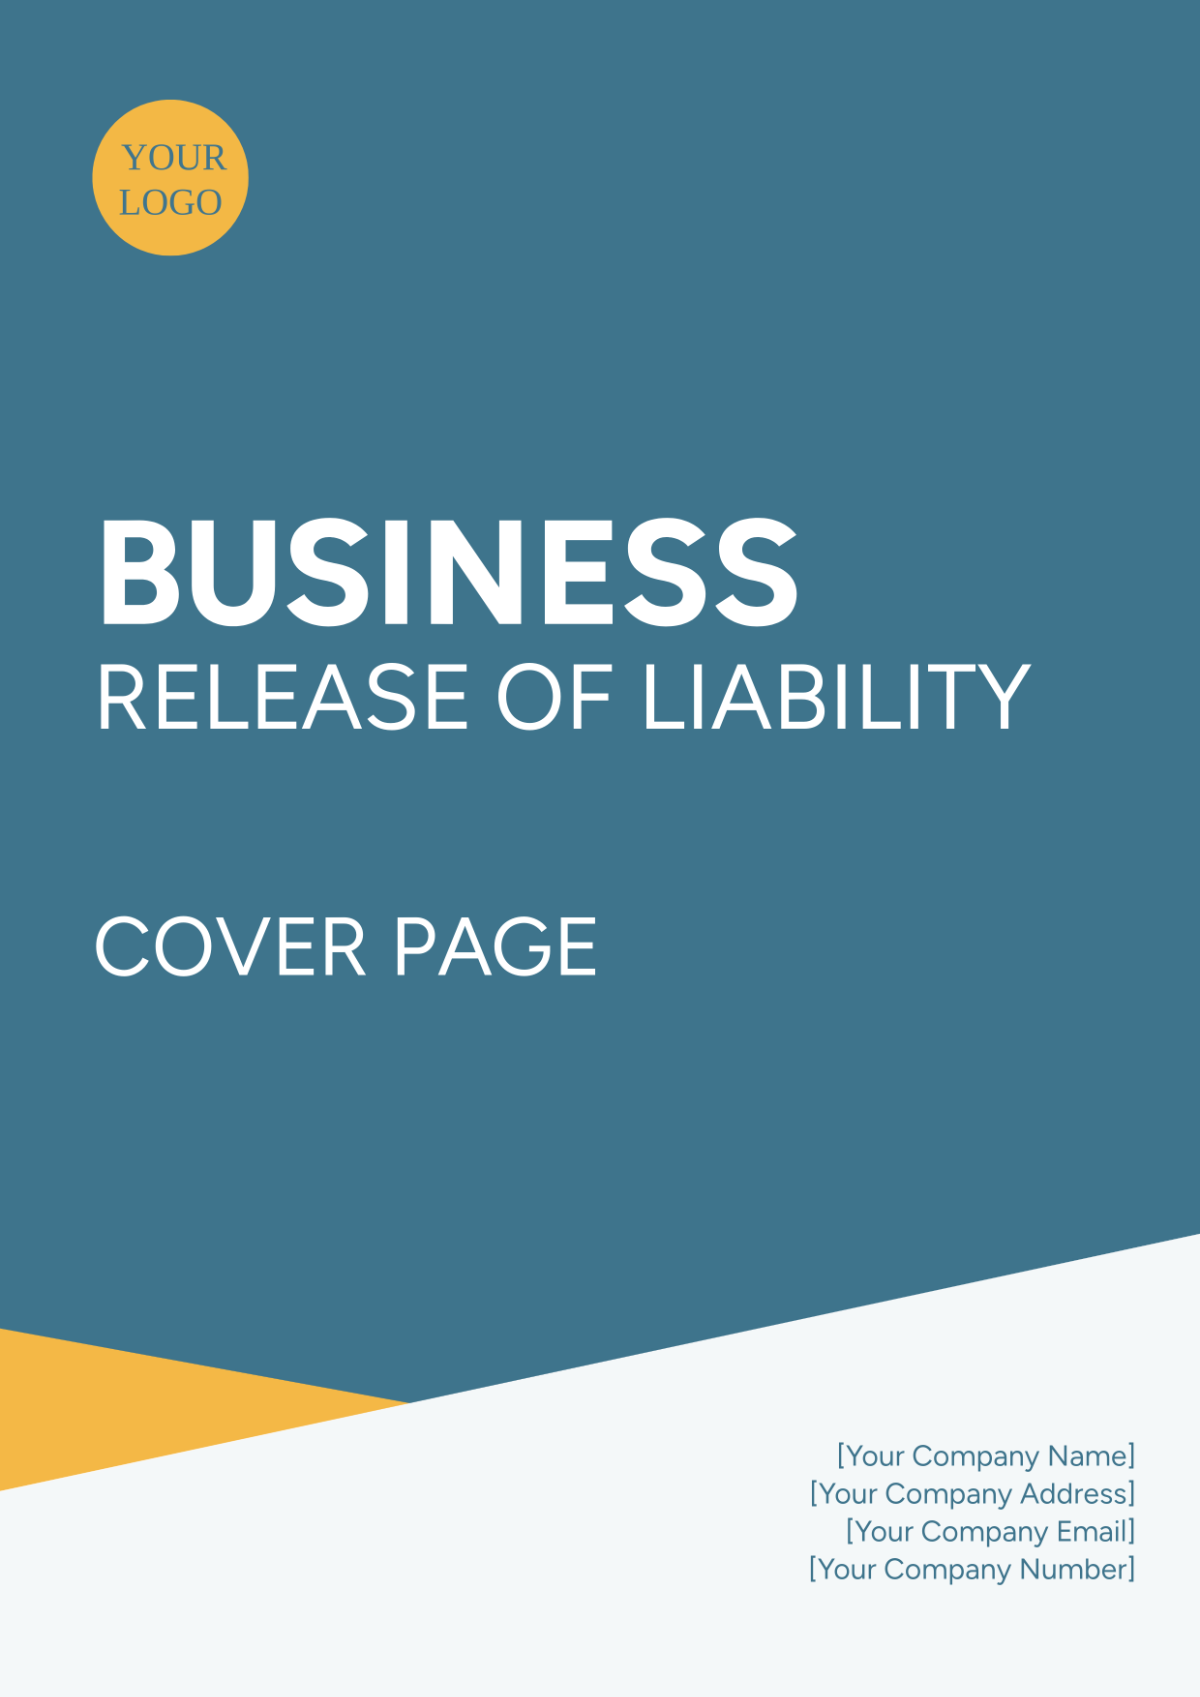 Business Release of Liability Cover Page